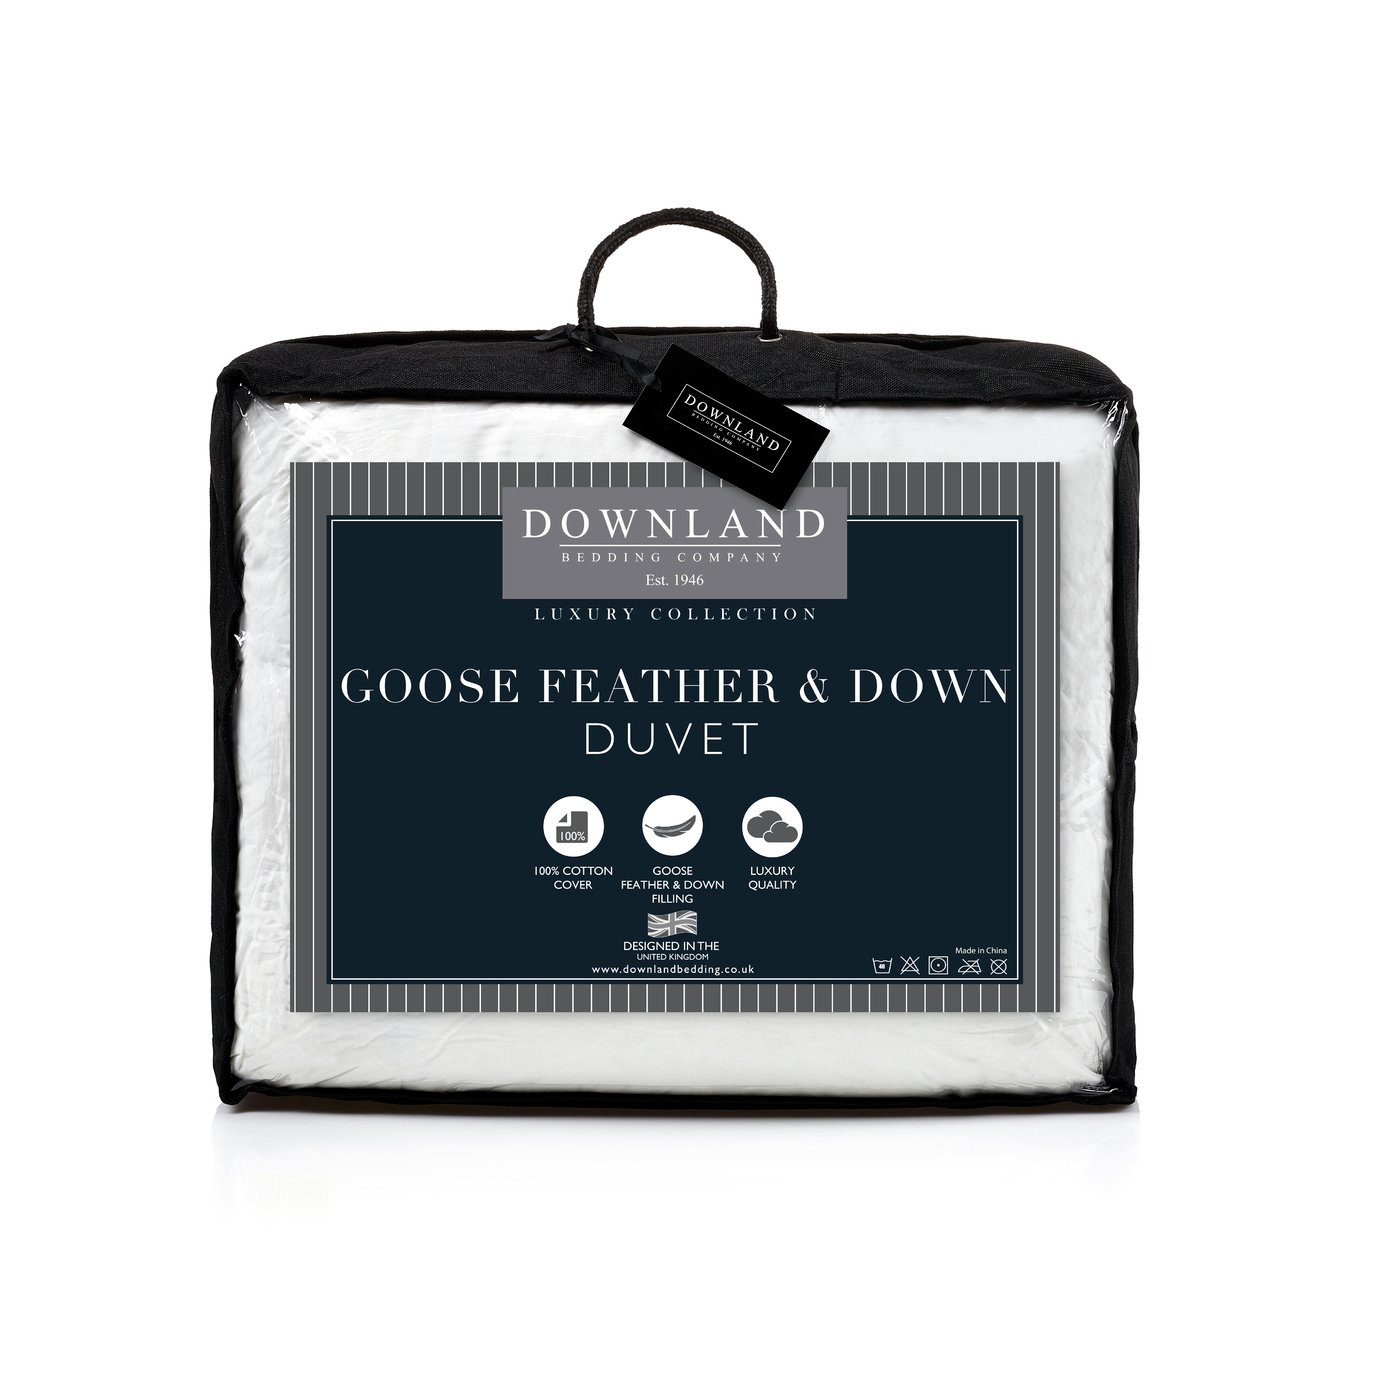 Downland 15 Tog Goose Feather and Down Duvet - Double